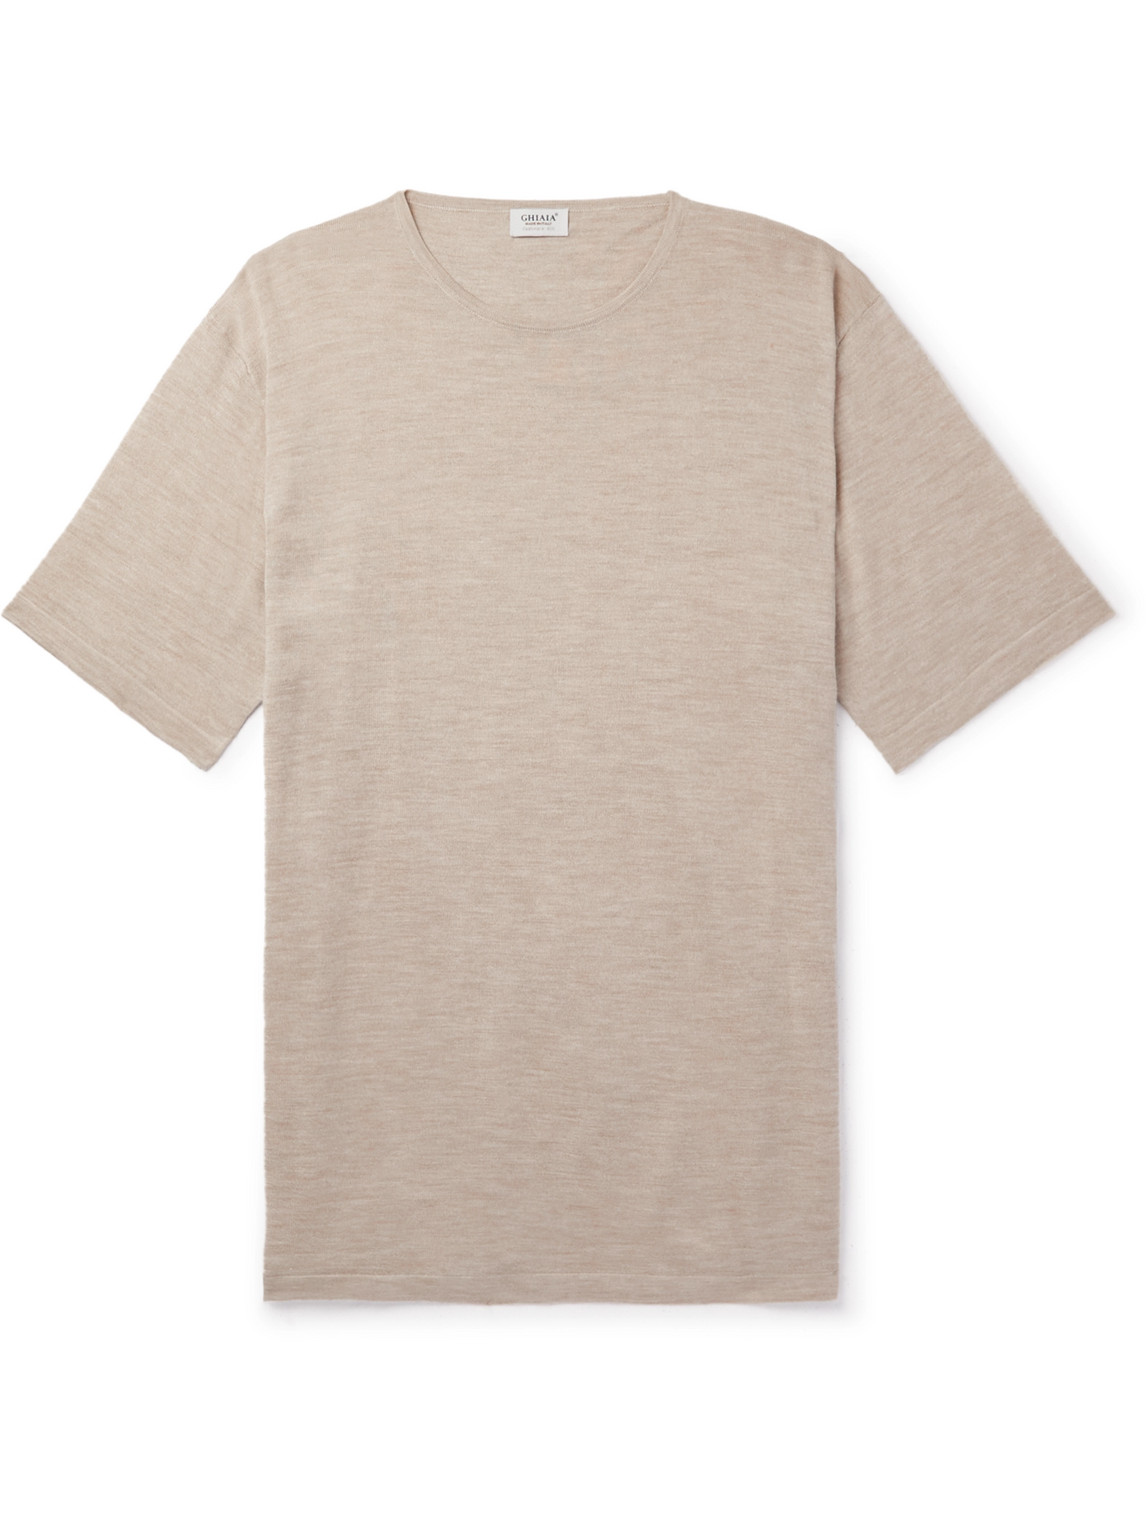 Ghiaia Cashmere Cashmere and Silk-Blend T-Shirt